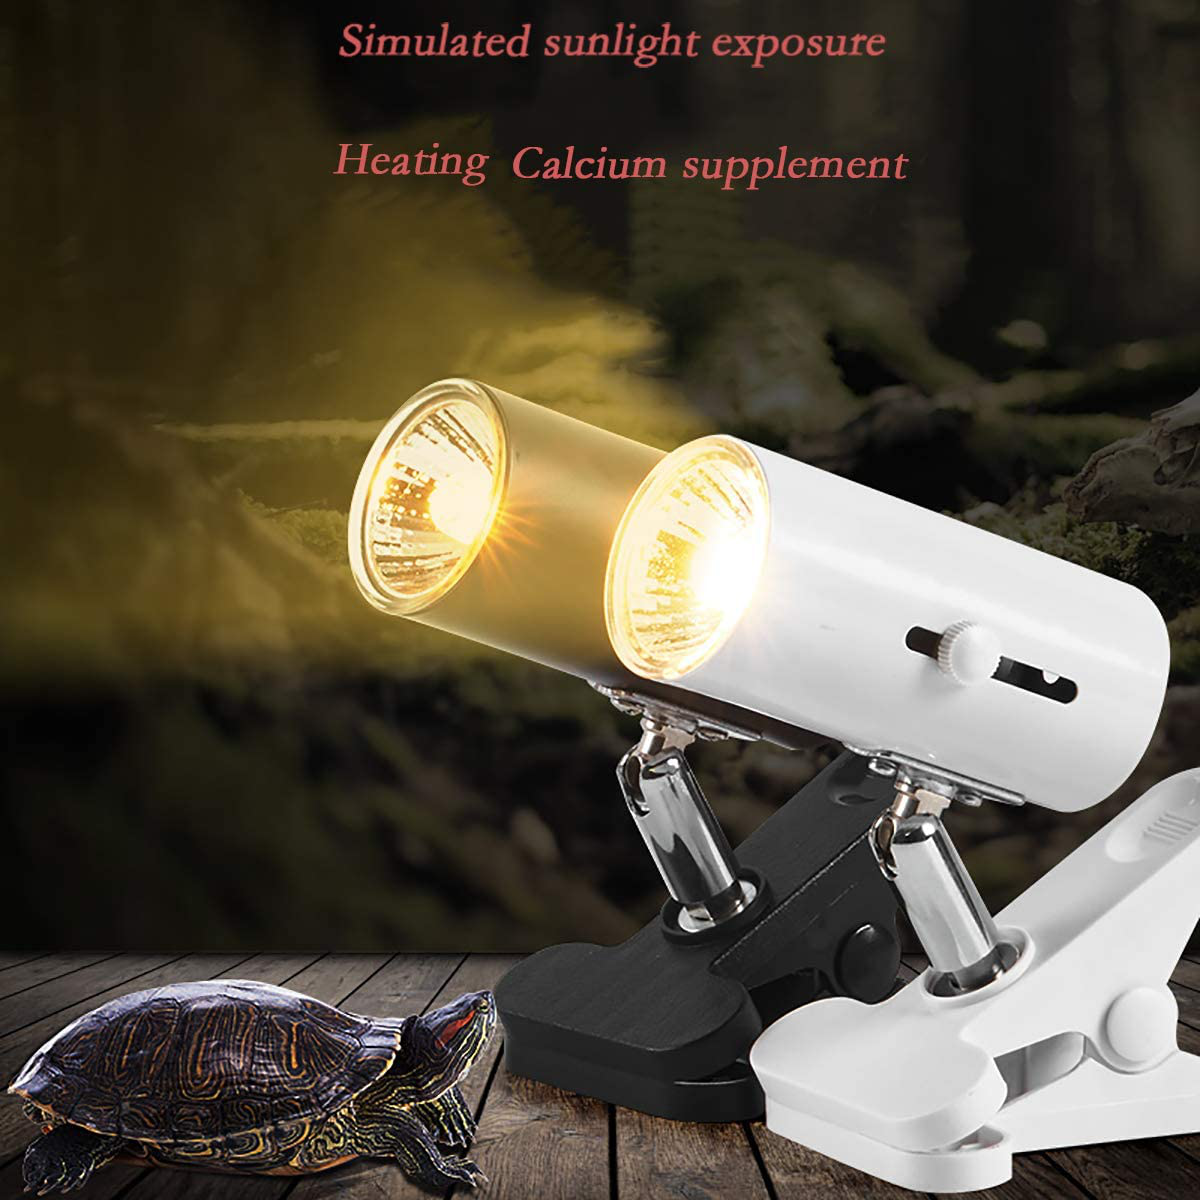 JLXMROSE Heat and Light for Reptiles and Amphibian Tanks with Bulbs & Switch, Adjustable and Rotates 360°, 25W/50W/E27 UVA UVB Bulbs Basking Spot Lamp, Pet Heating Lamp (Black)